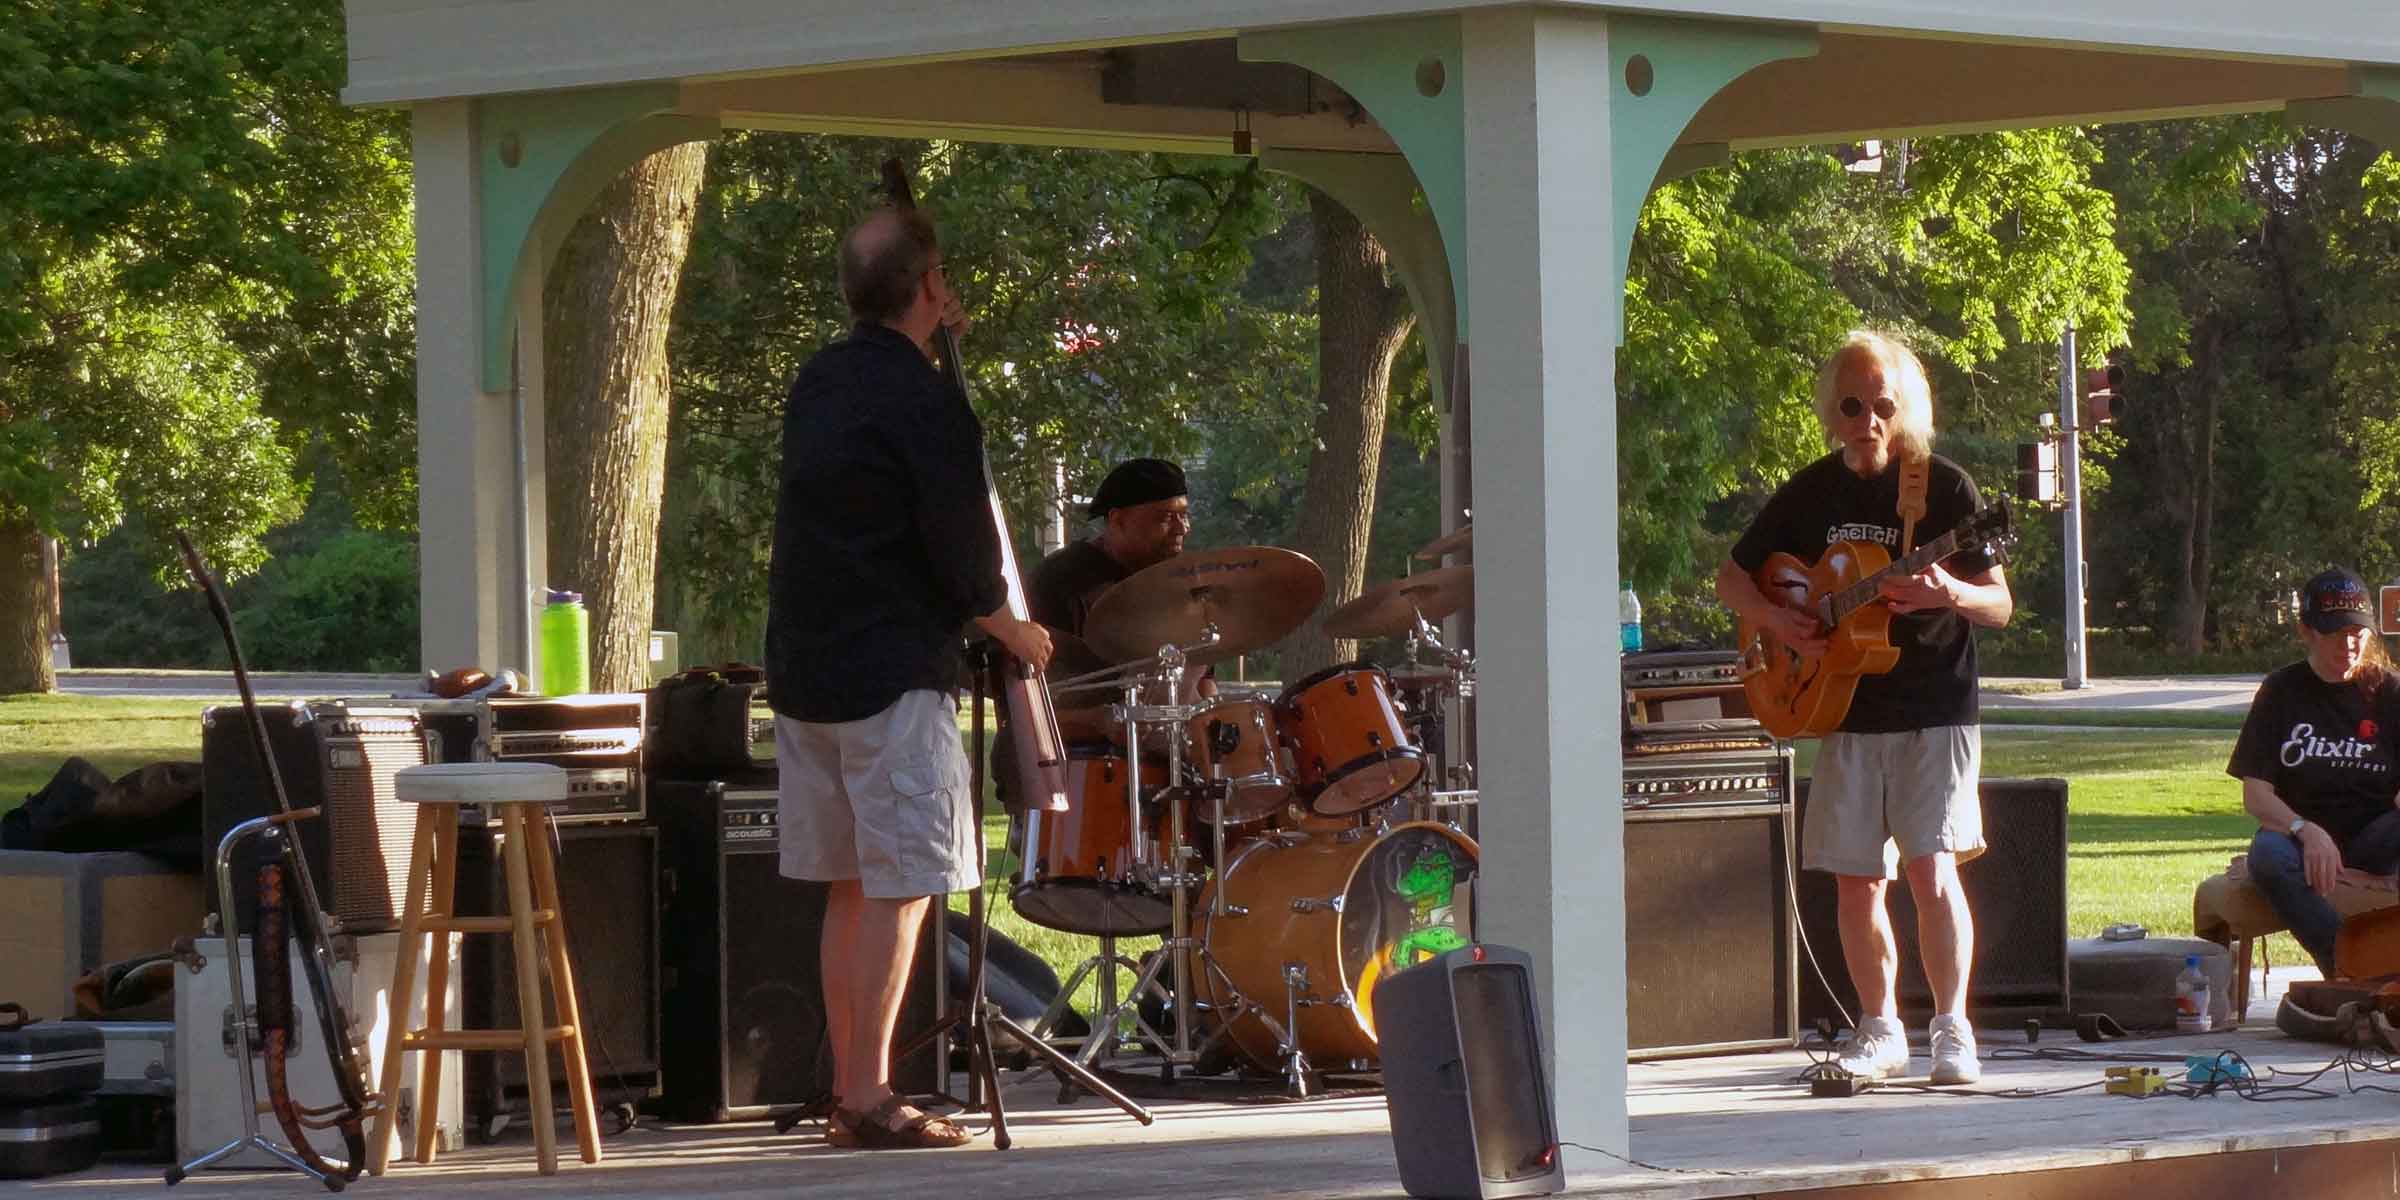 Village Green Summer Concert Series Continues for its 7th Year